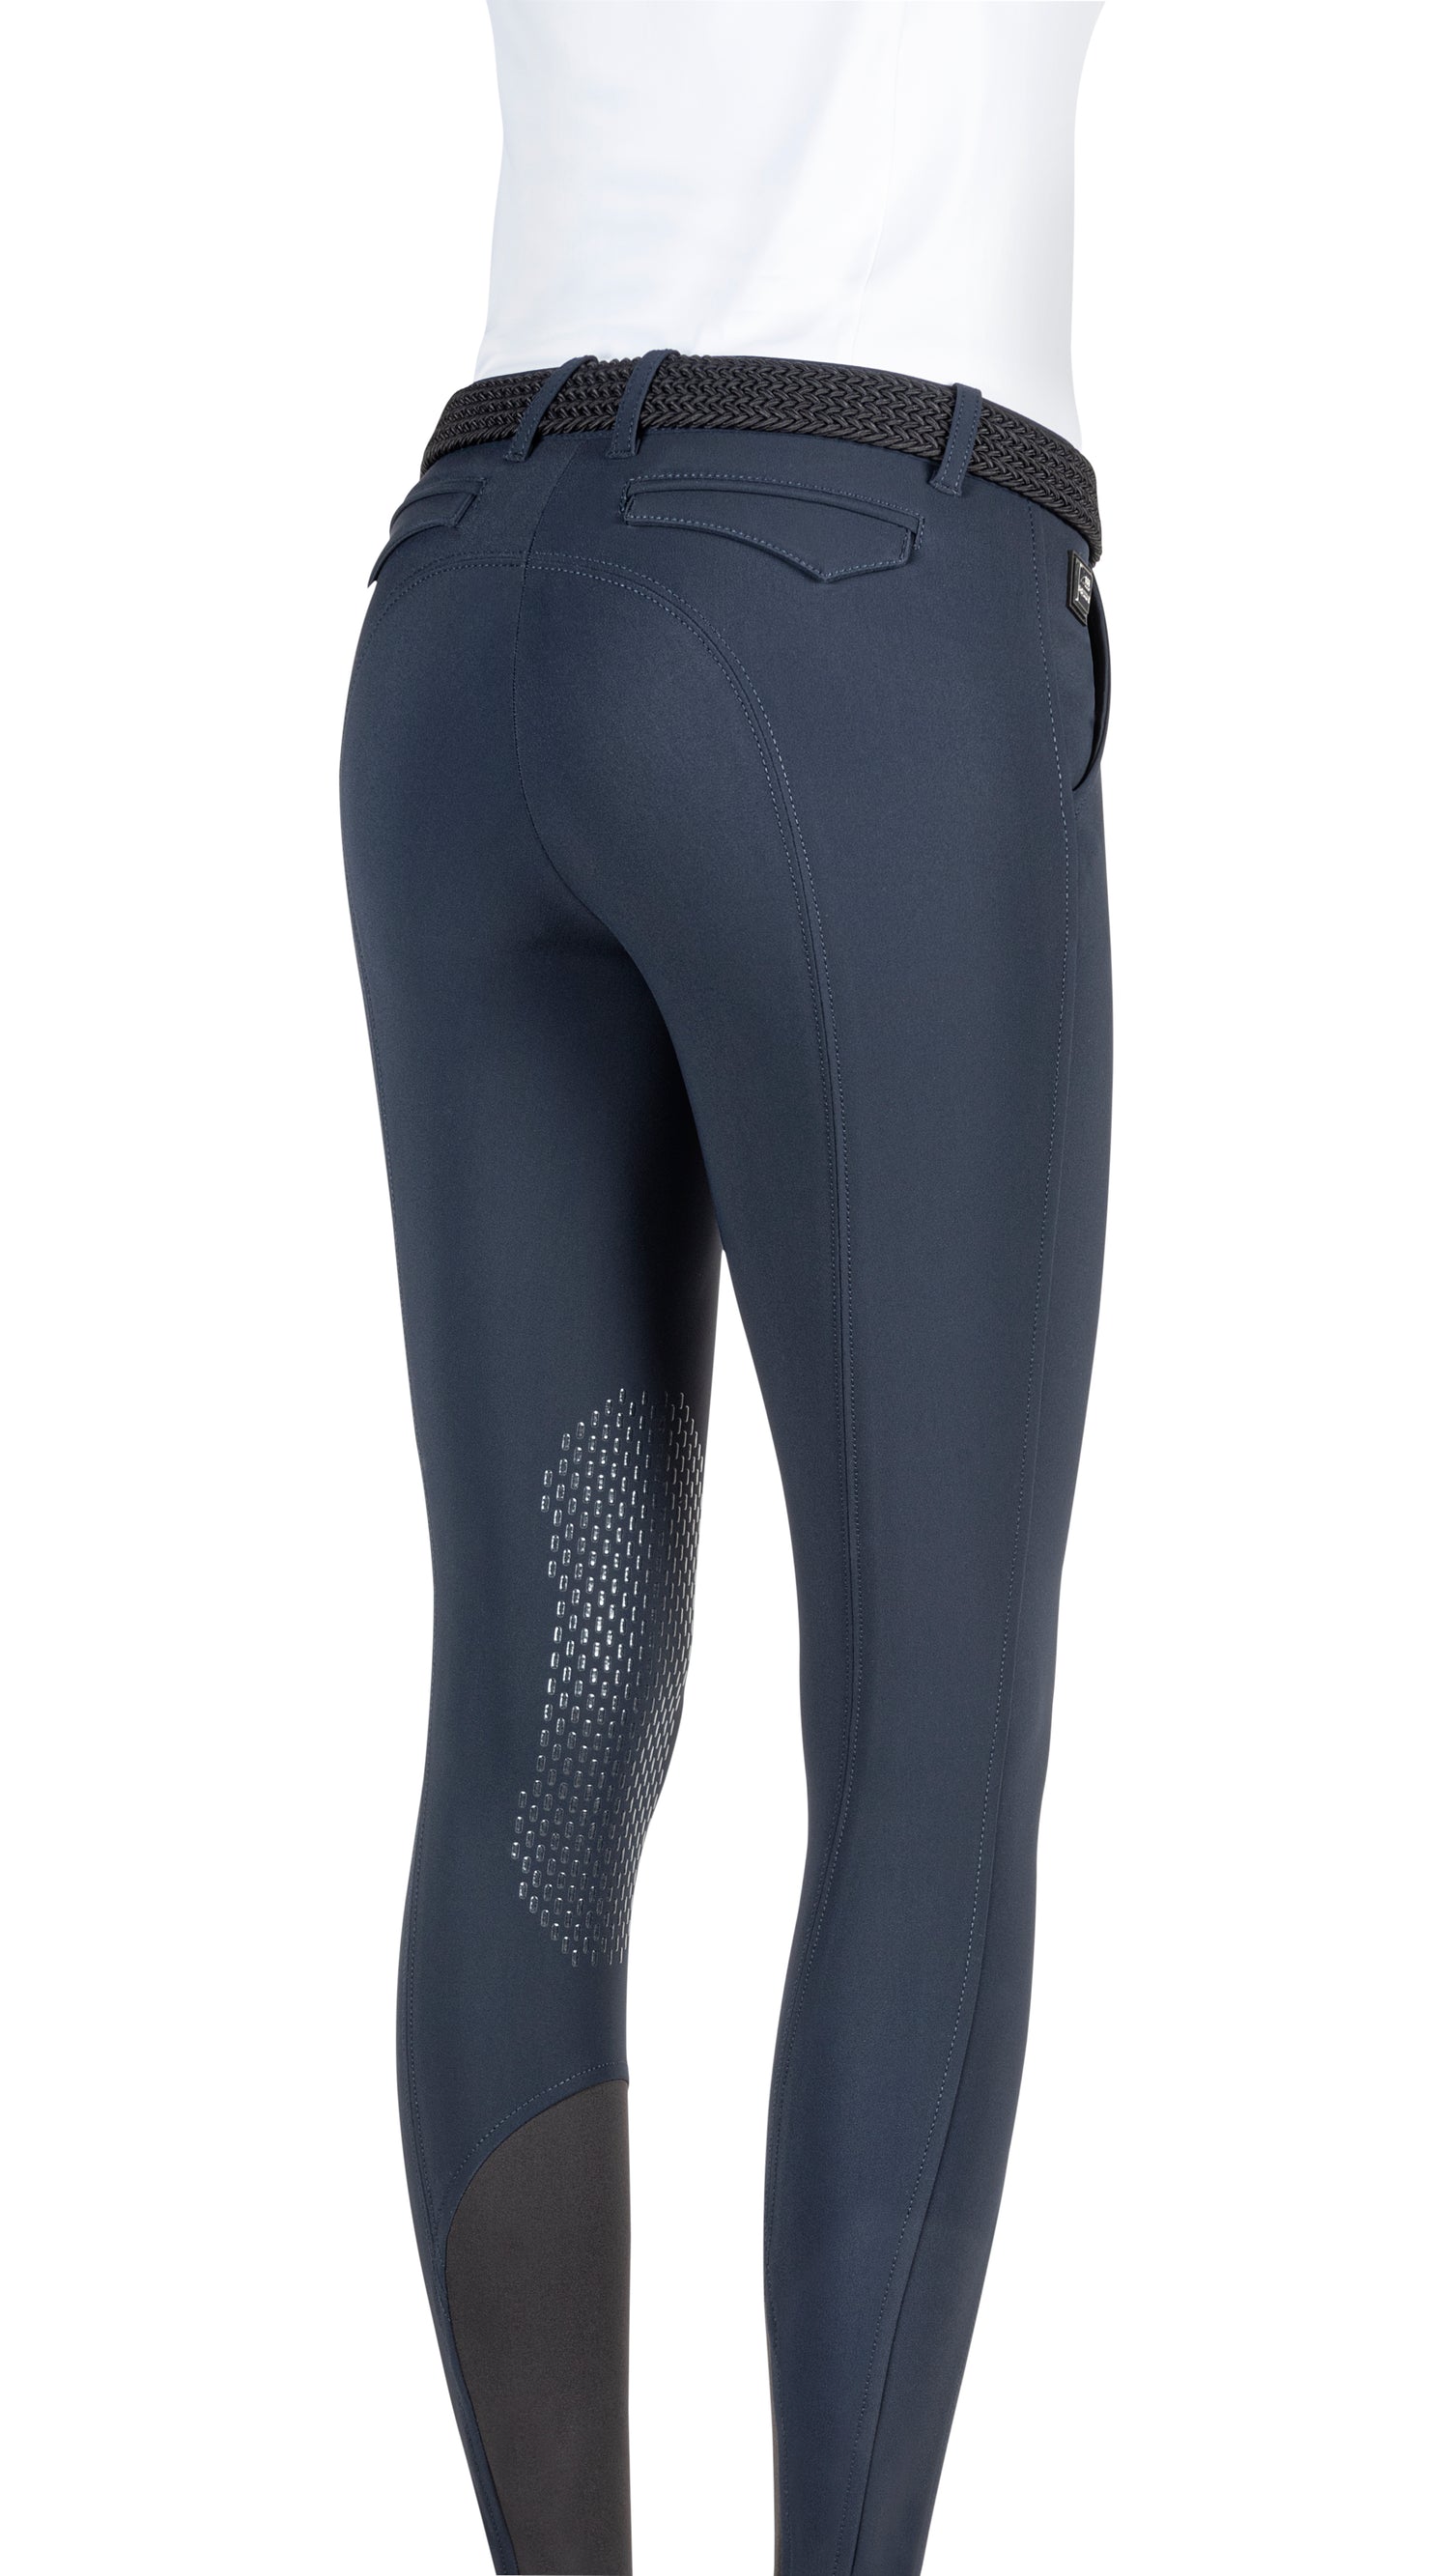 The Equiline Brendak is a great new addition to the Range. The breech is made from b-move fabric, has the x grip knees and with its ergonomic  tailoring  proves maximum comfort and freedom of movement.   If your size is not in stock we can happily order it in for you depending on stock availability. Delivery normally takes 10-14 days..   Machine washable